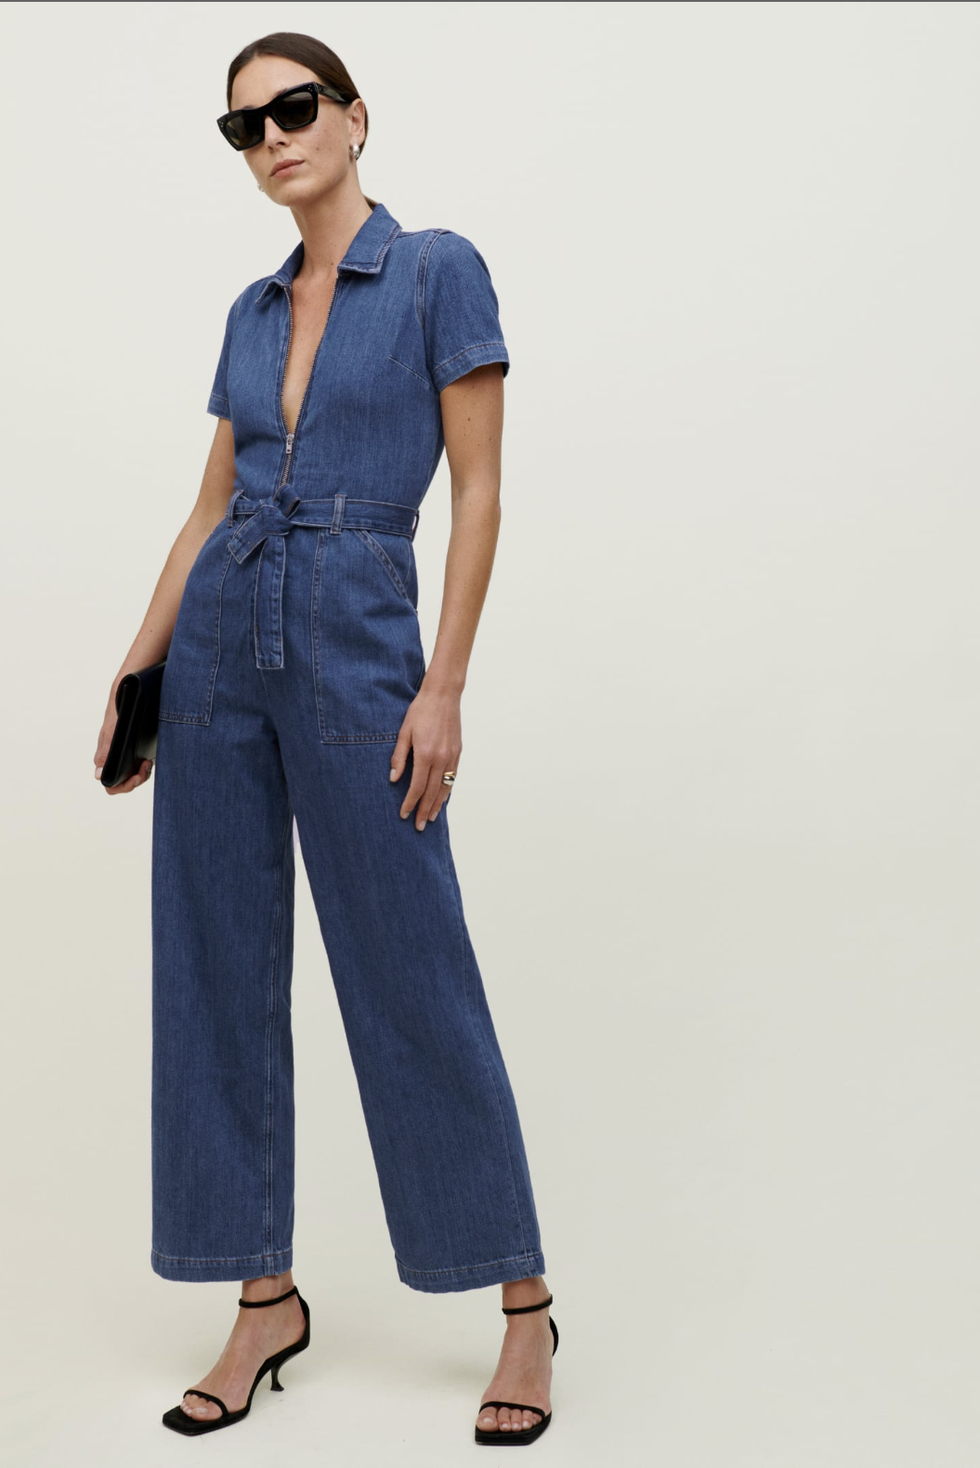 Boiler suits for women: 15 best boiler suits to buy now